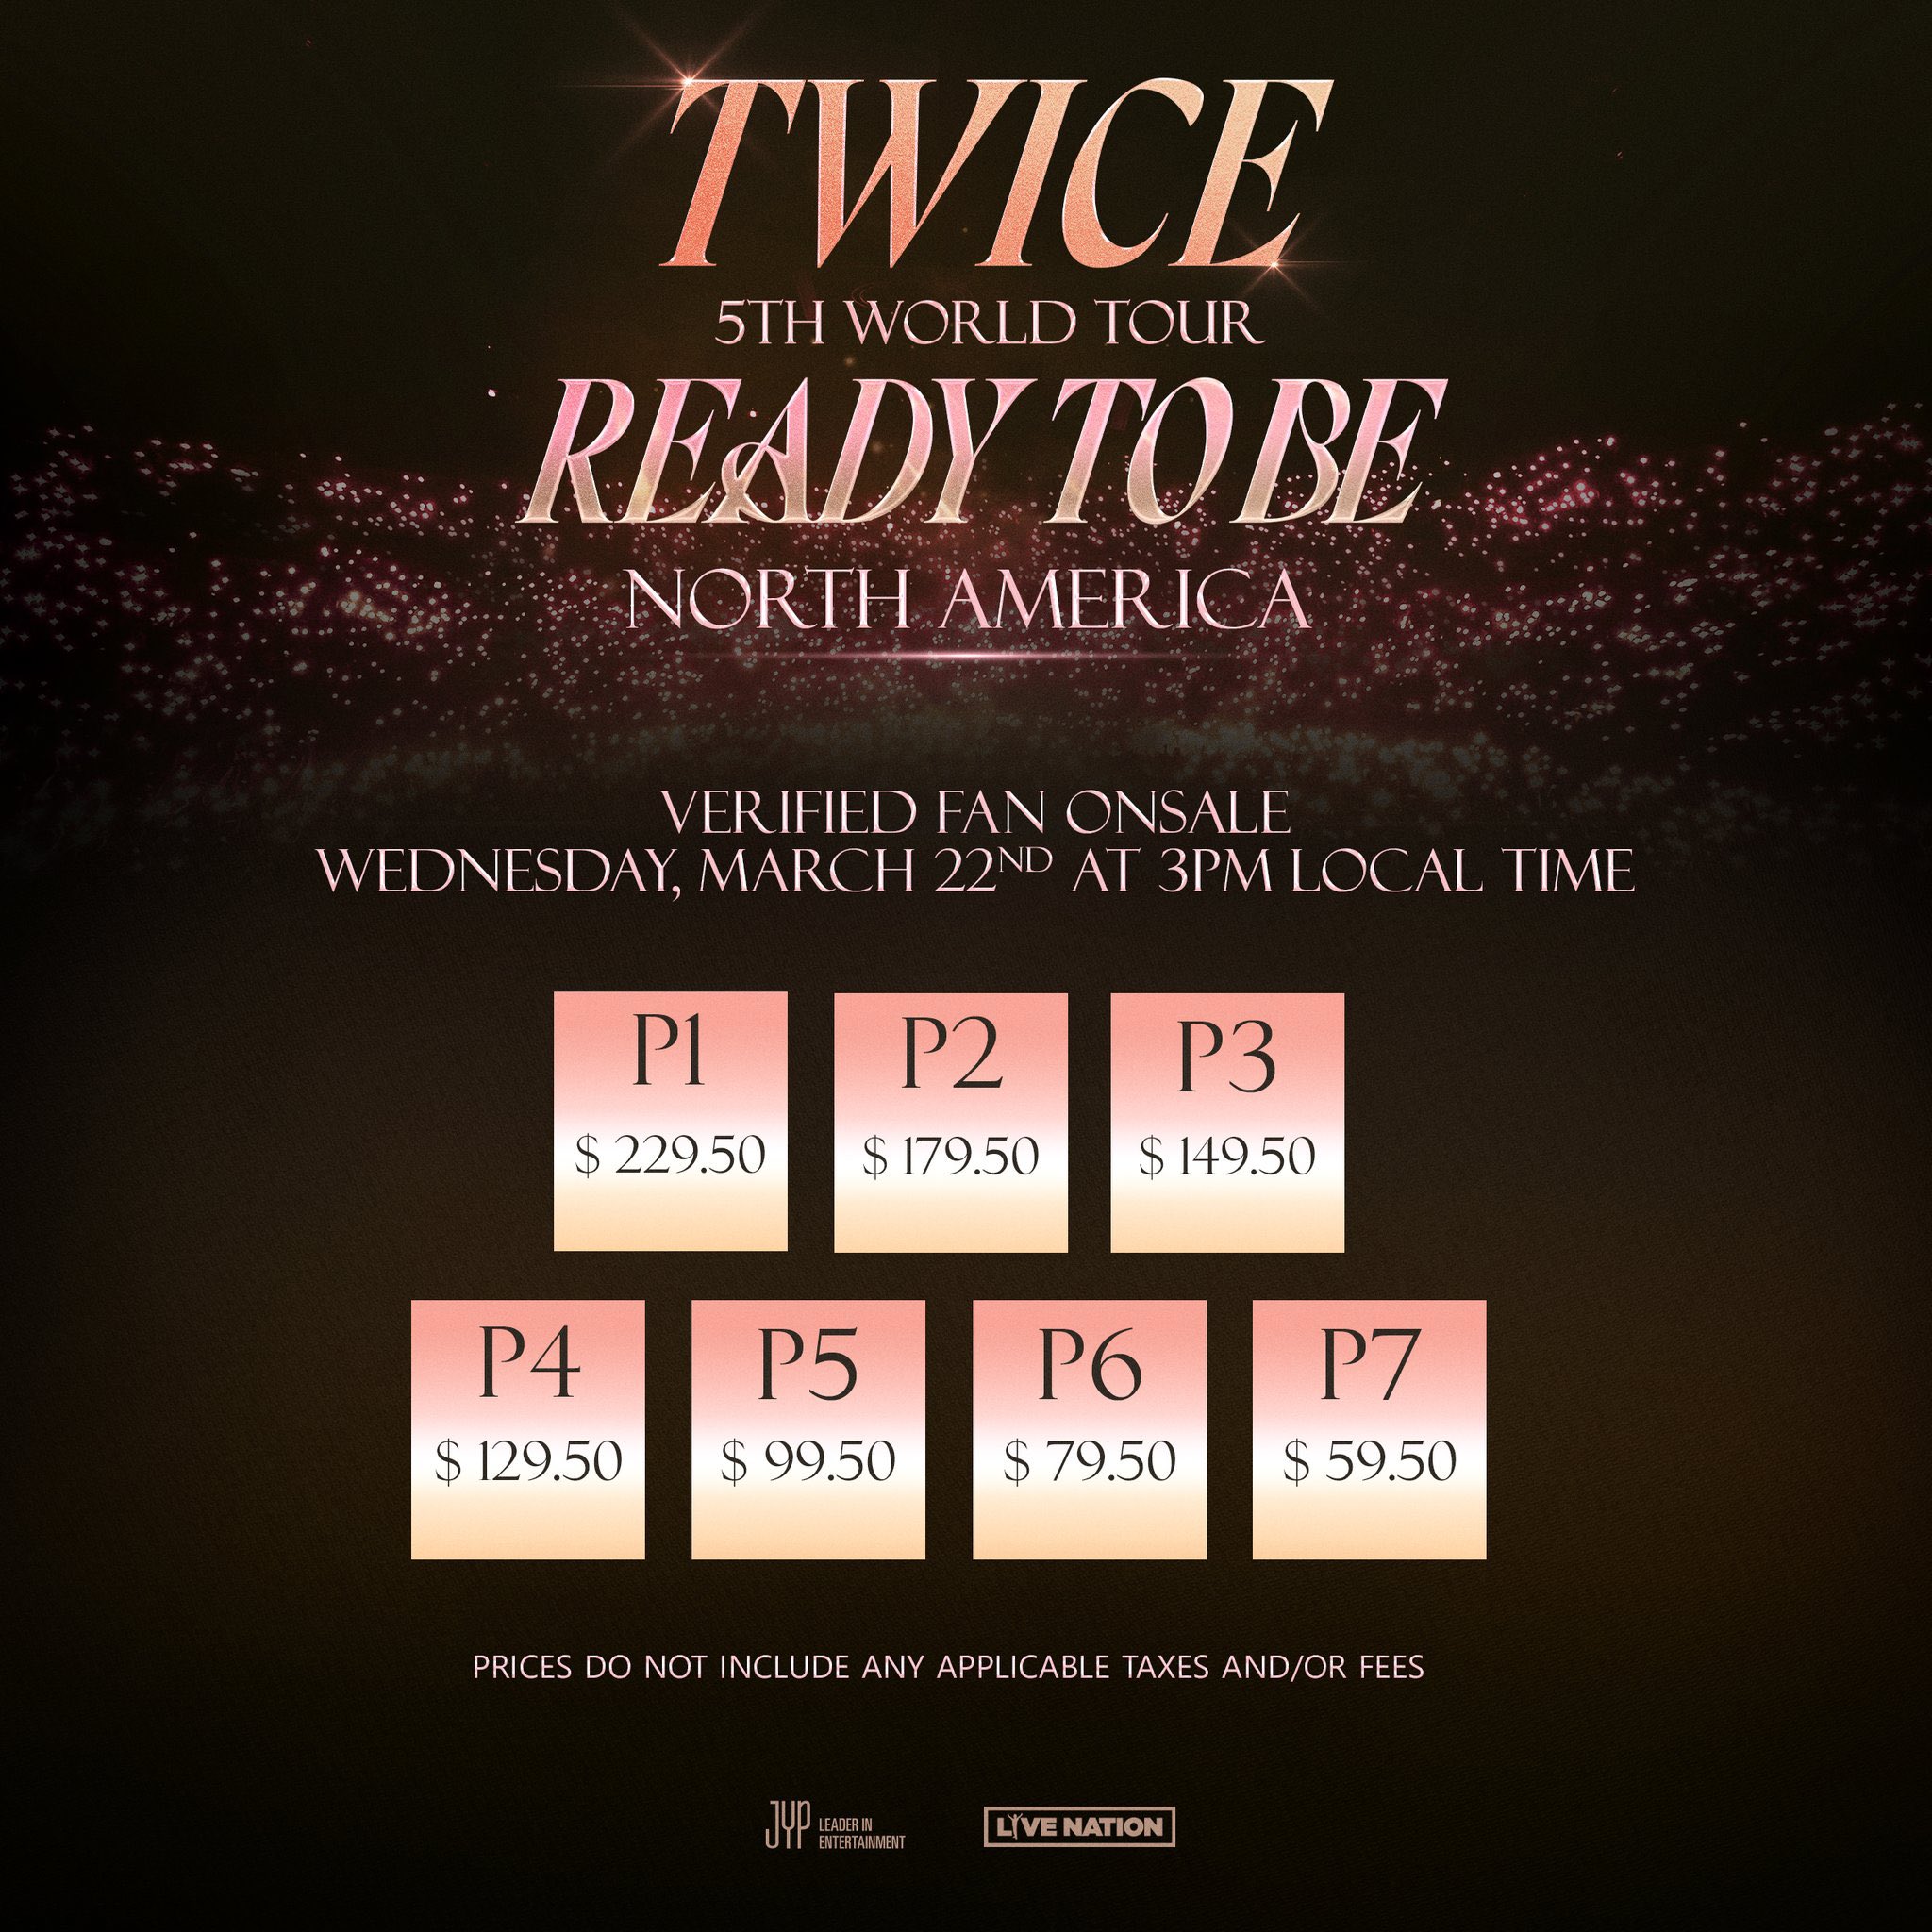 Twice tour 2023: Where to buy tickets, schedule, prices